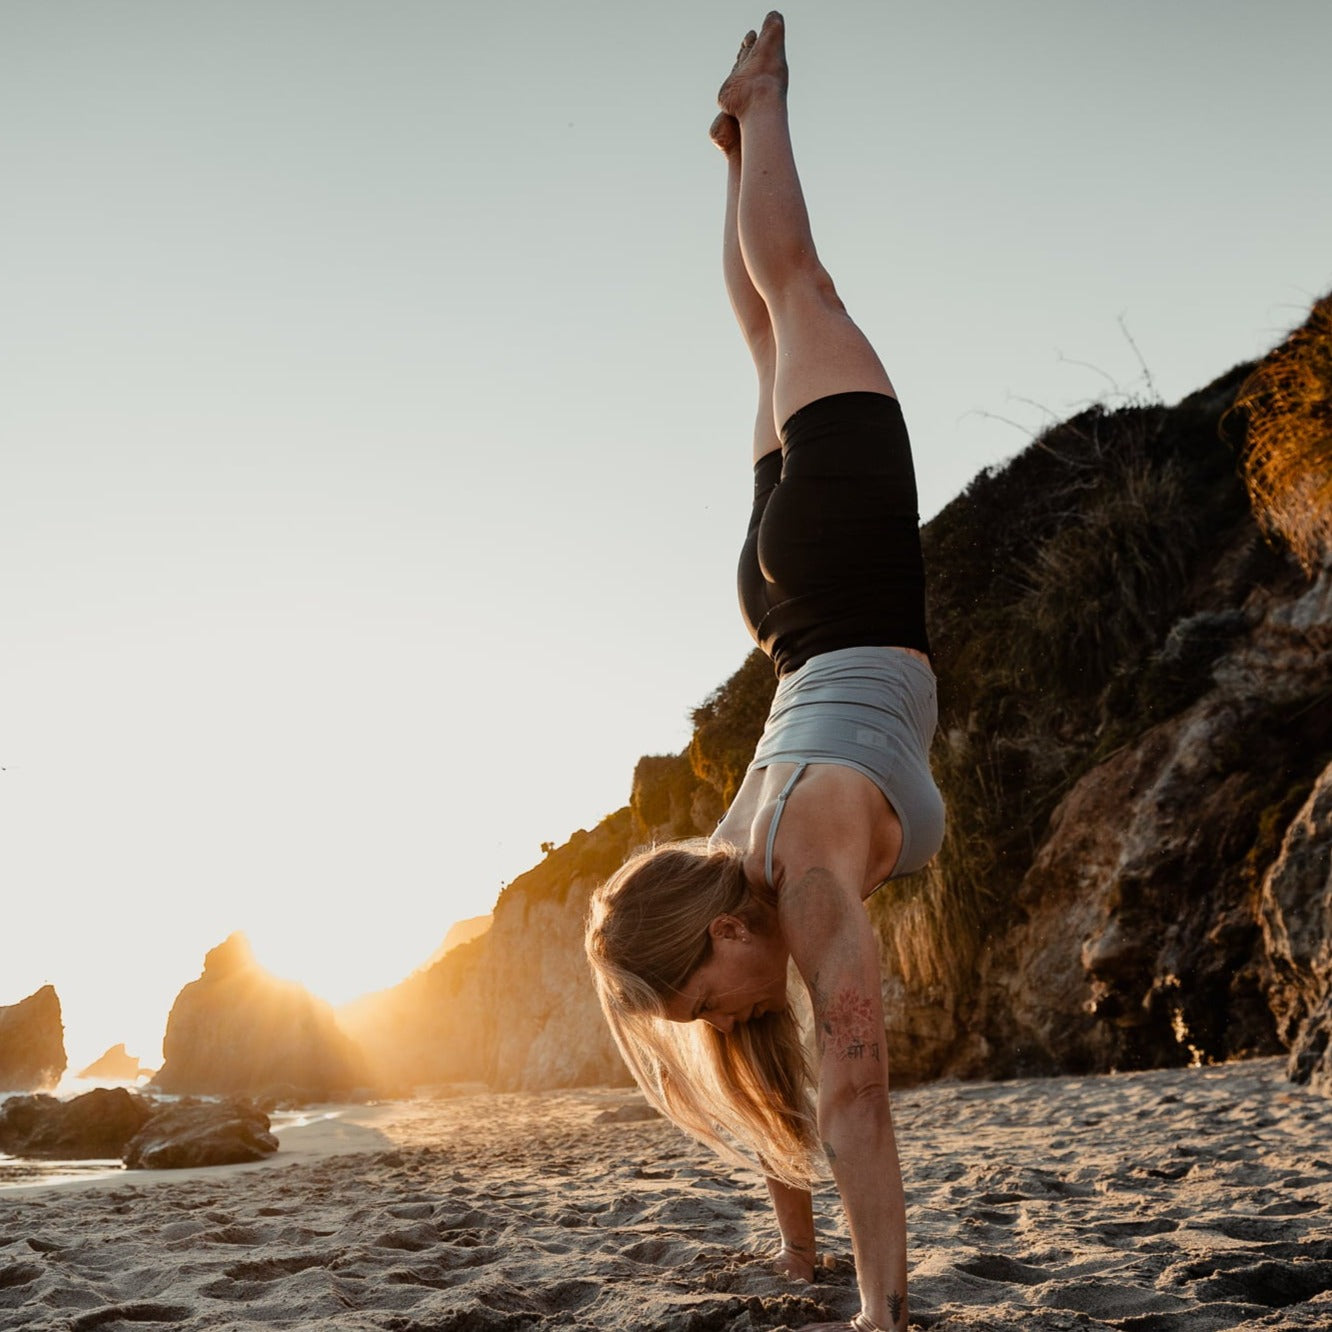 a woman does a handstand wearing Hilltop Bike Shorts and a Ridge bralette